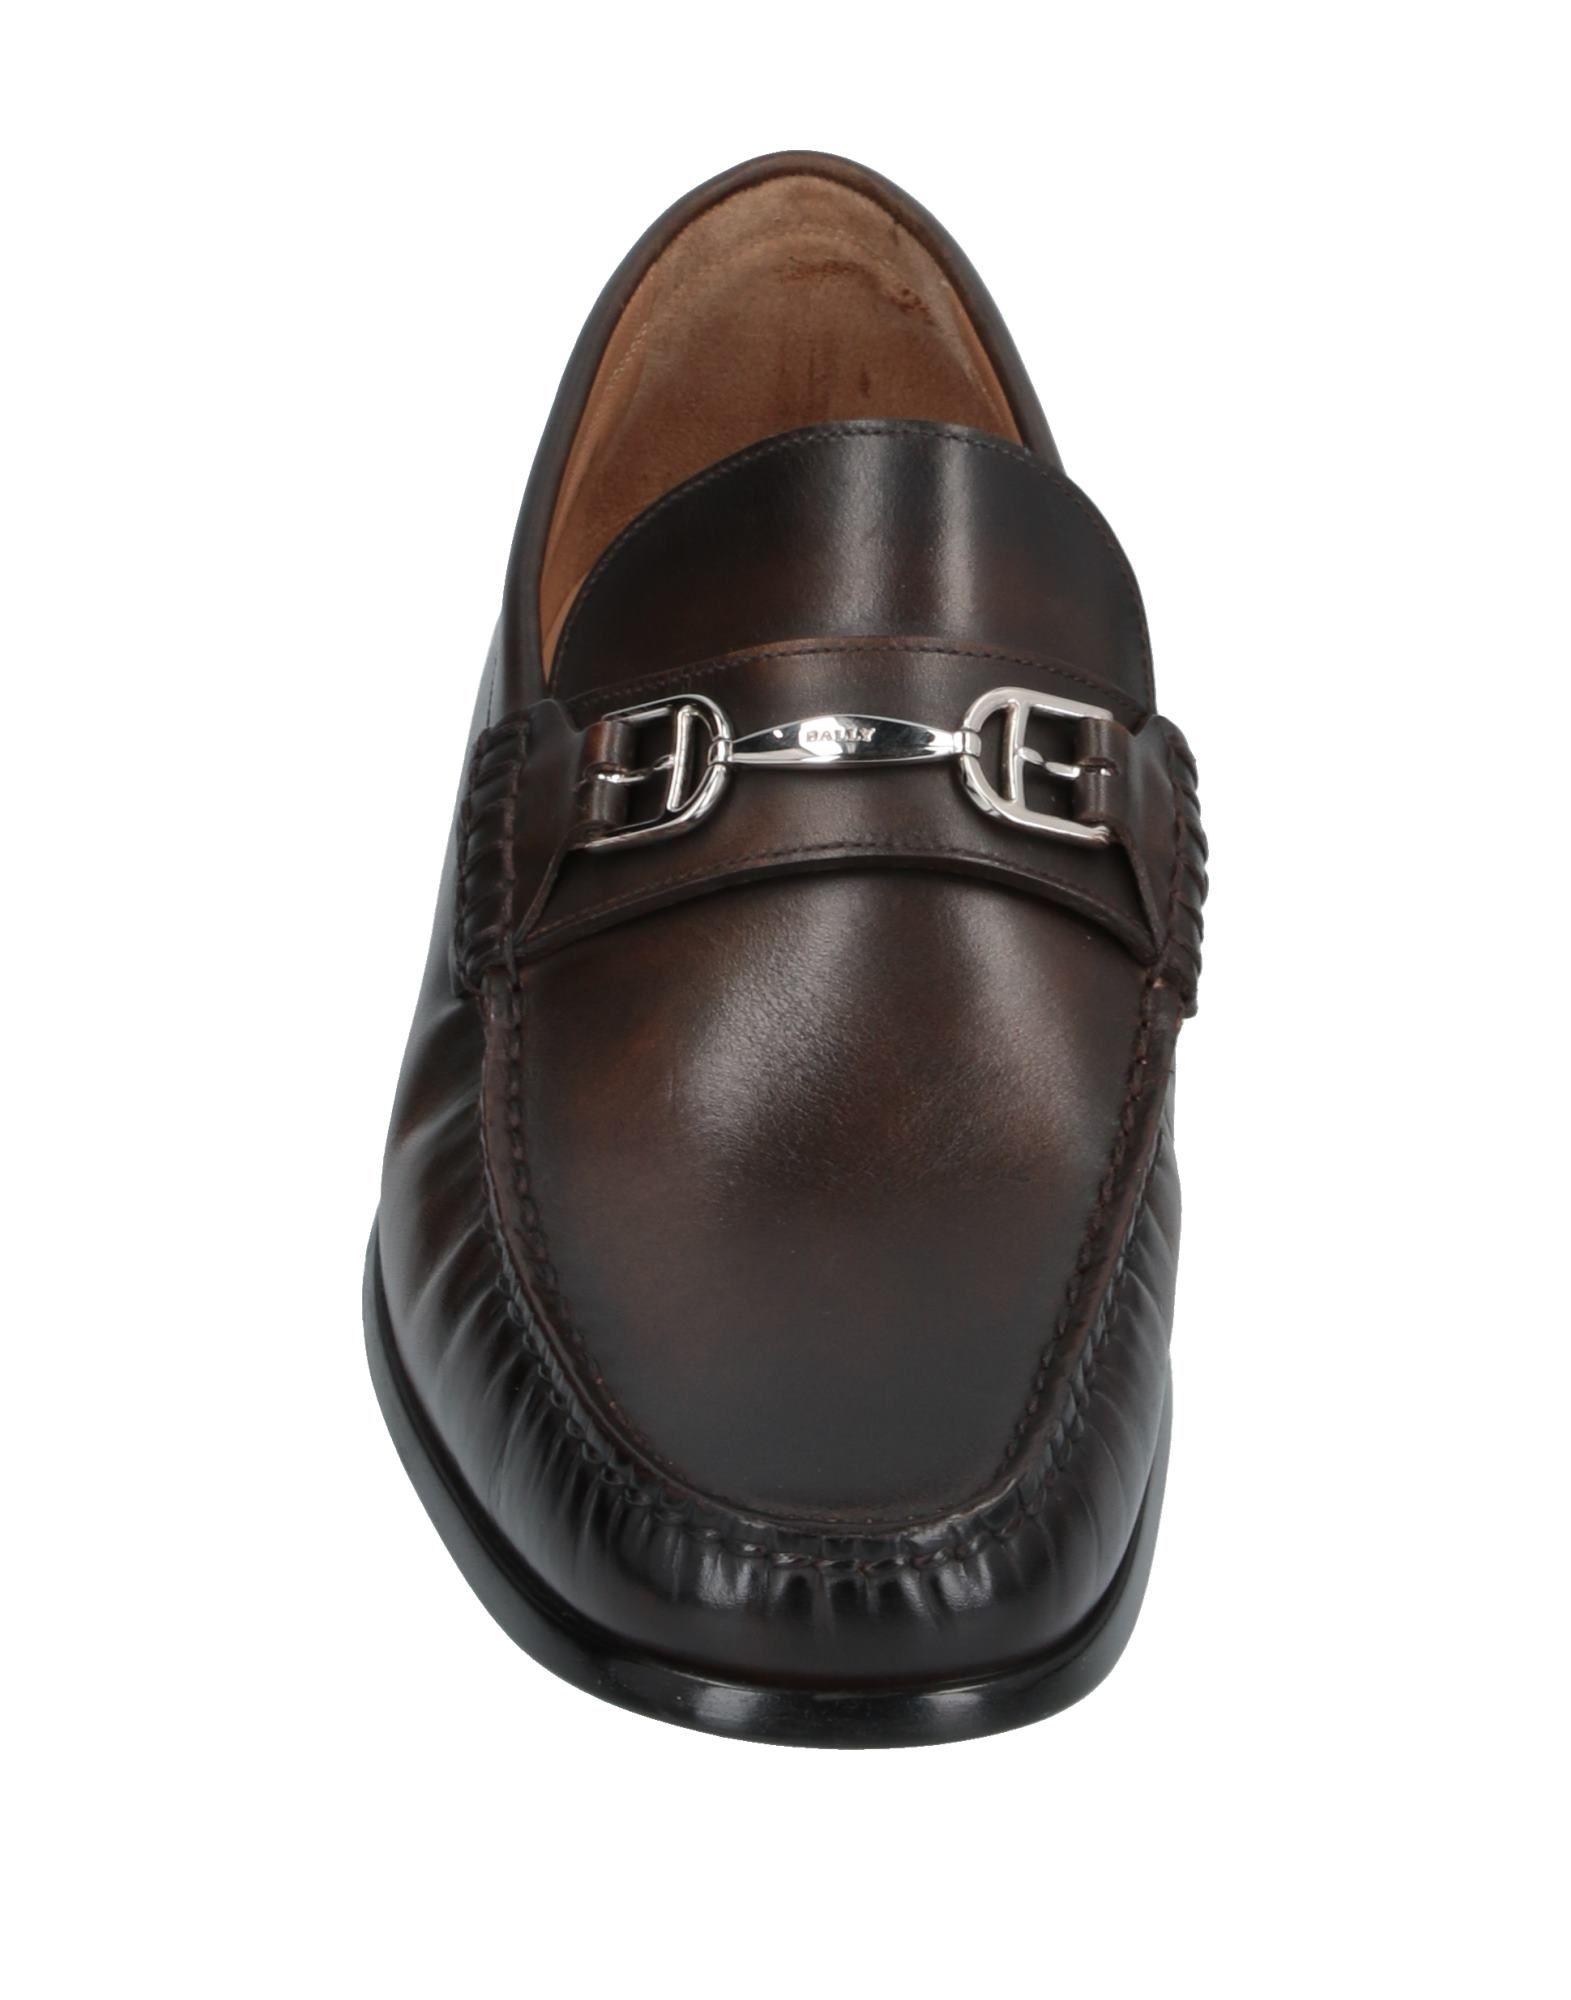 Bally Leather Loafer in Dark Brown (Brown) for Men - Lyst